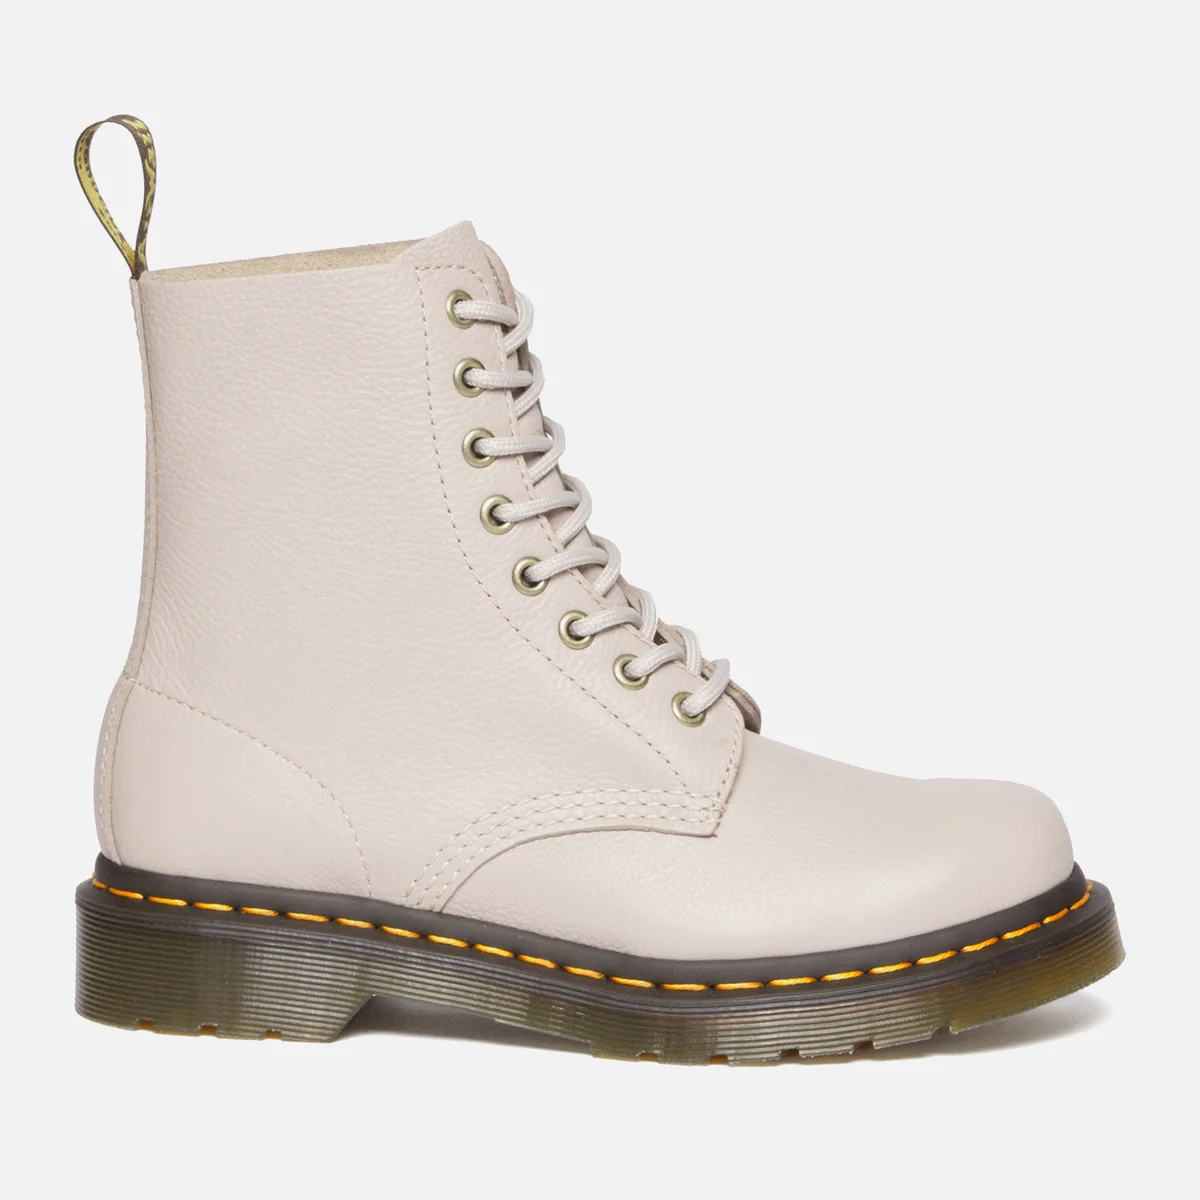 Dr. Martens Women's 1460 Pascal Virginia Leather 8-Eye Boots Image 1